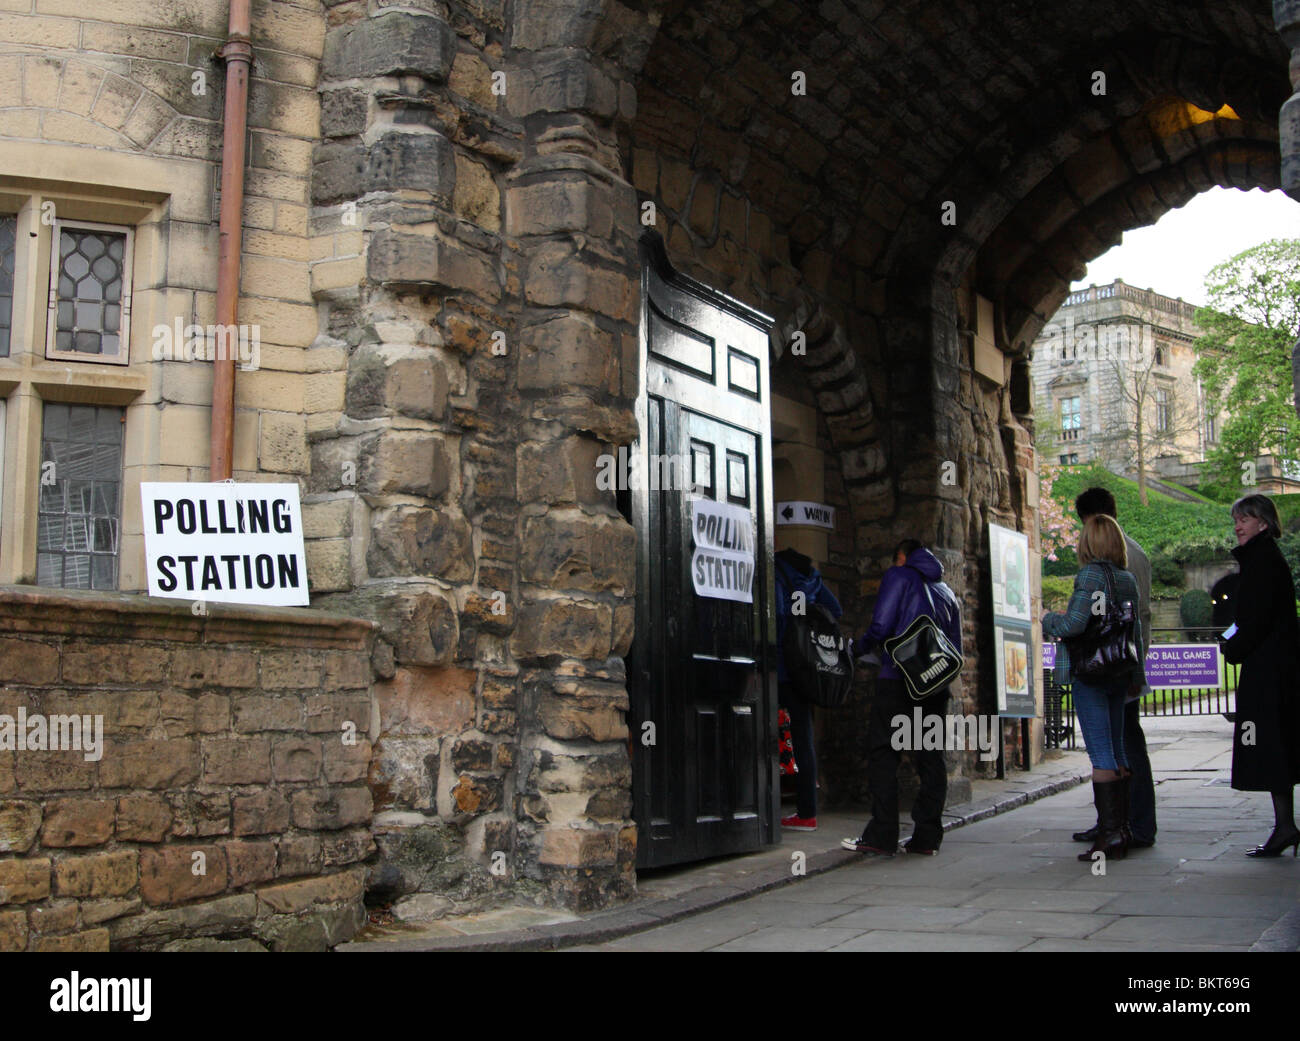 Voters queuing at Polling Station located in the gatehouse at Nottingham Castle, Nottingham, England, U.K. Stock Photo